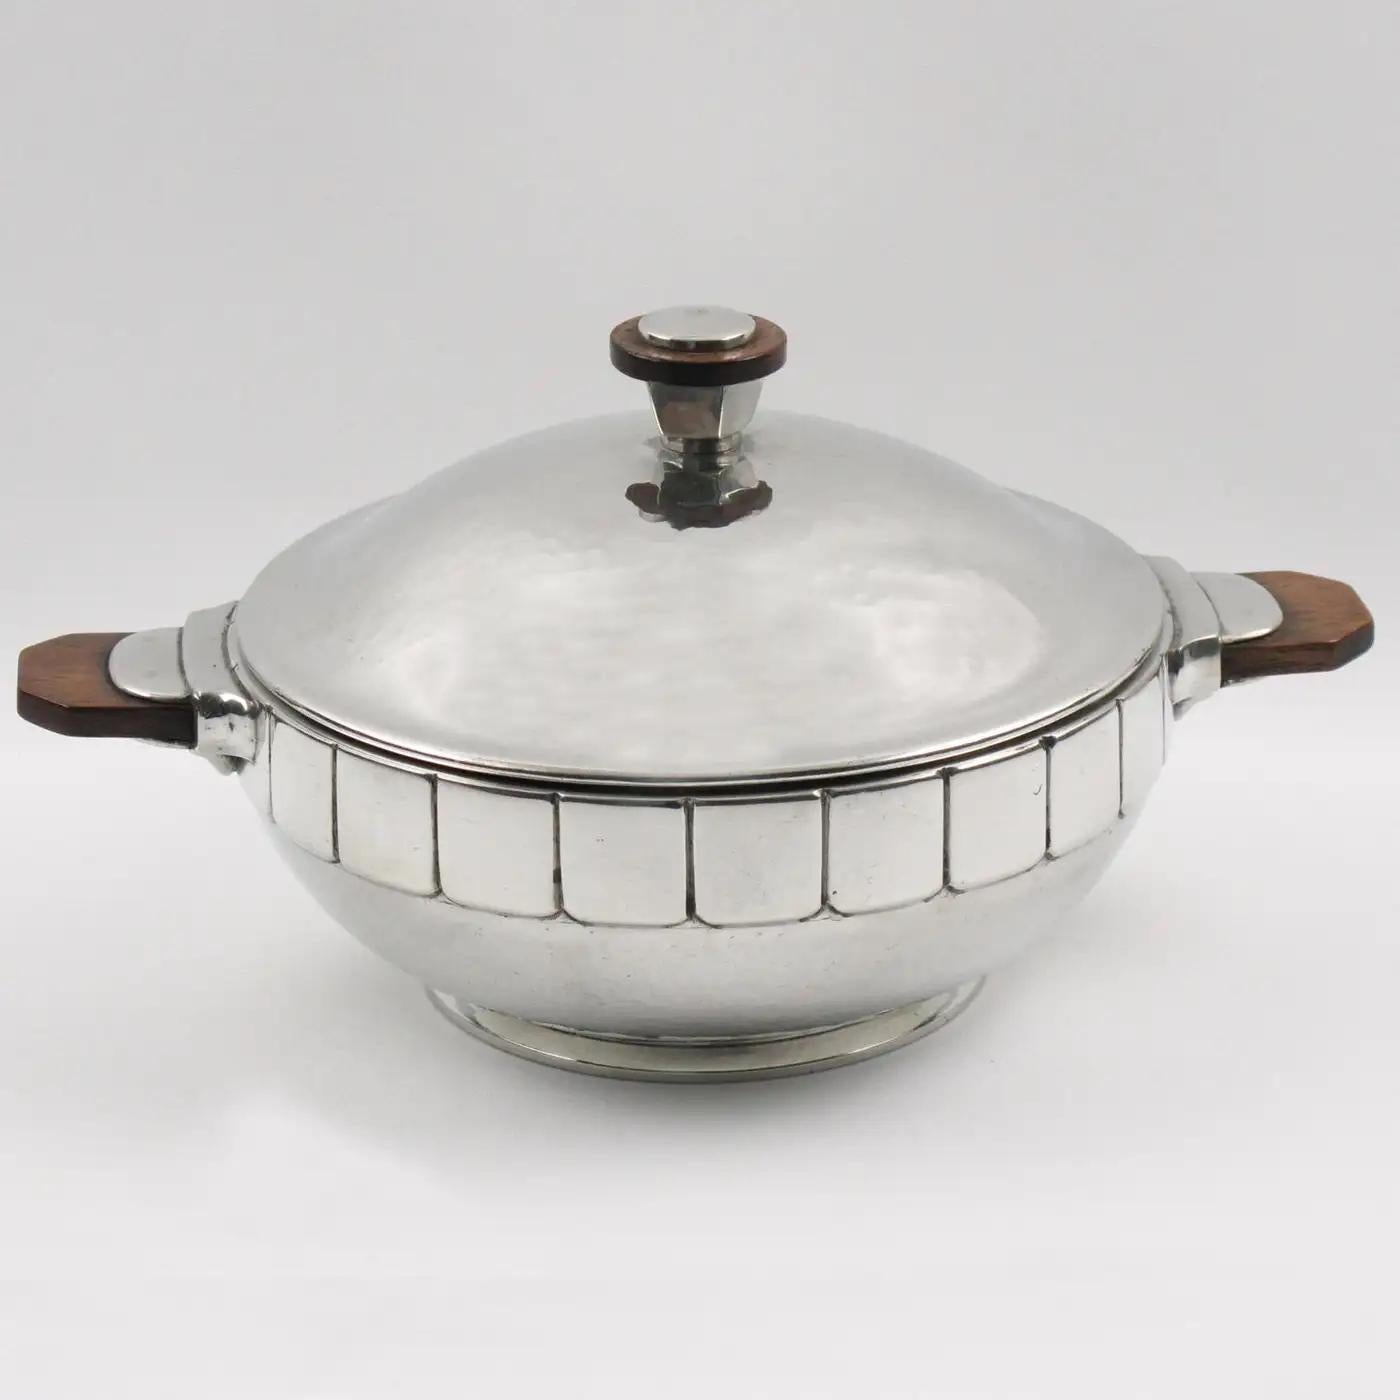 This lovely embossed polished pewter tureen was designed and manufactured by H. J. Swiss Pewter. The modernist shape has a detailed embossed design and solid wood handles. The covered dish is marked underside with Eagle/Phoenix head emblem and H.J.